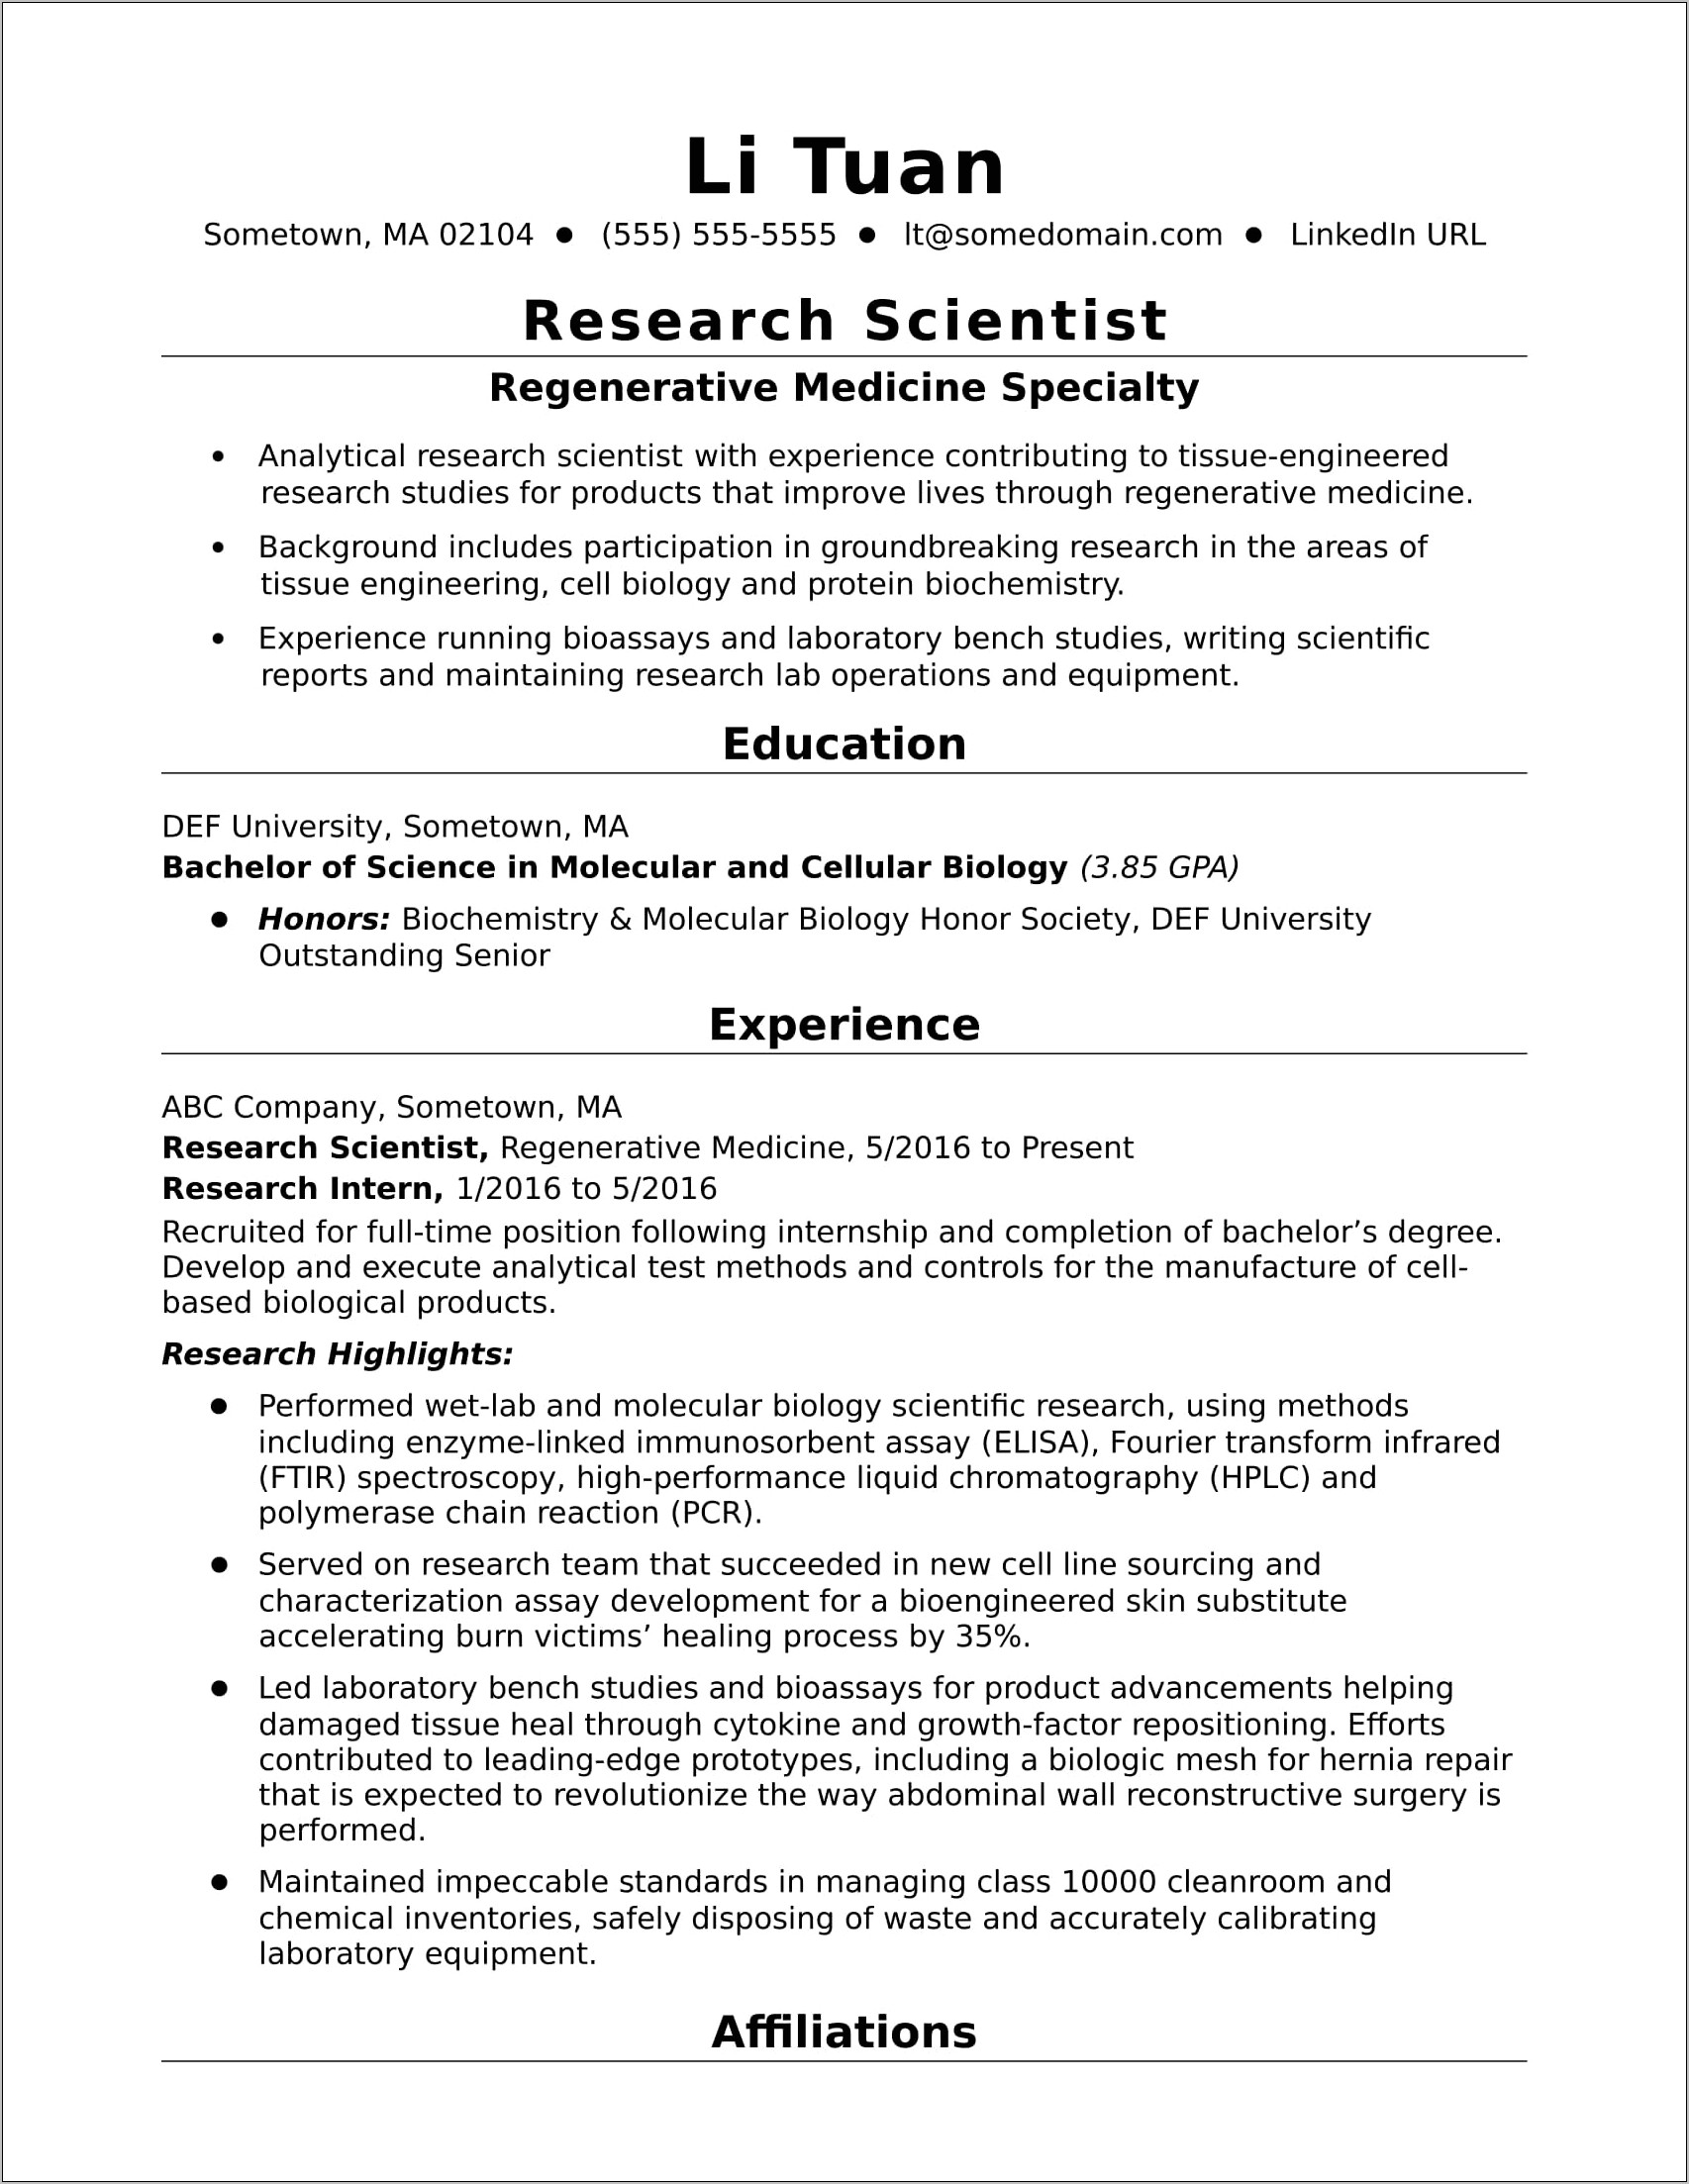 Resume Objective Statement For Research Assistant No Experience